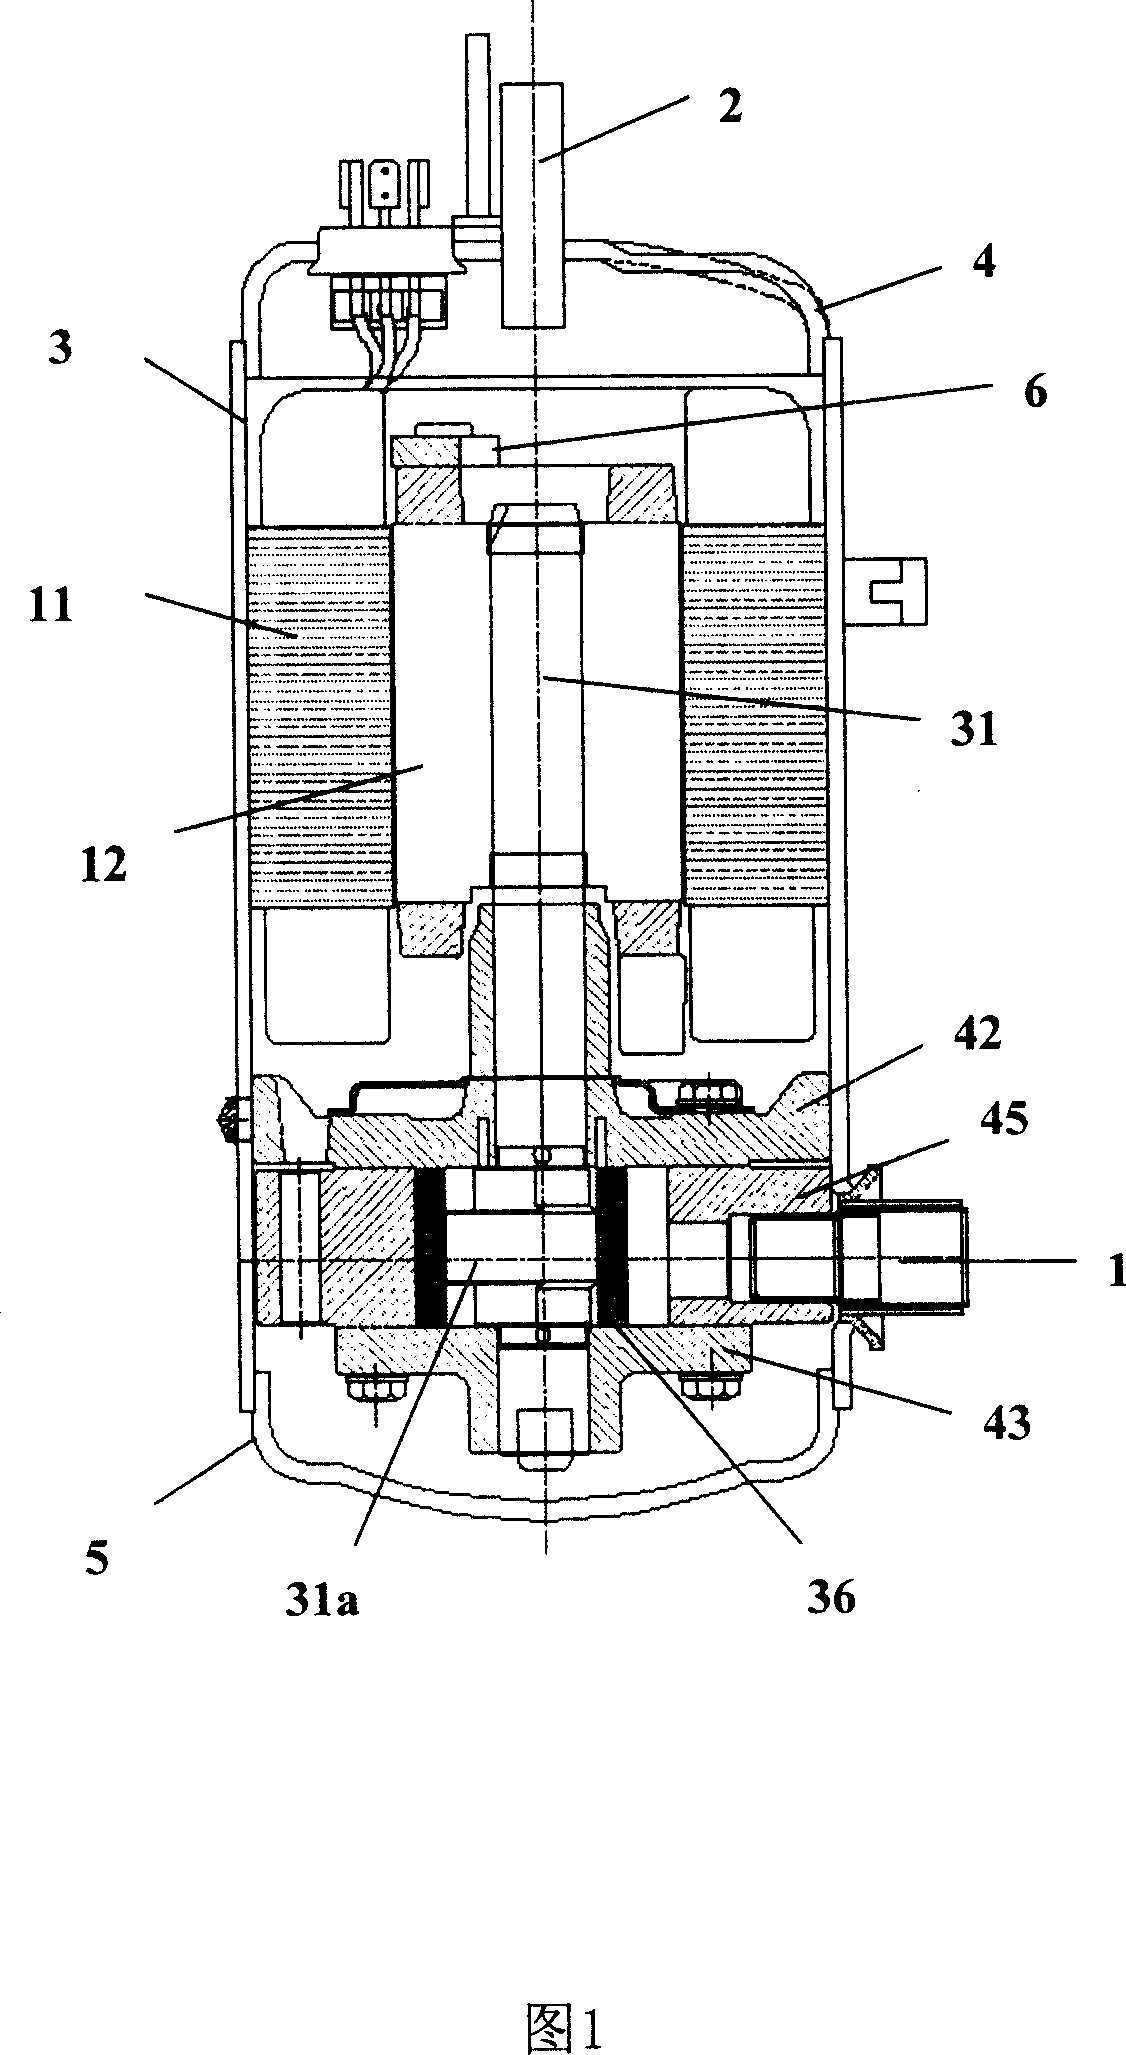 Electromechanical part of rotary compressor